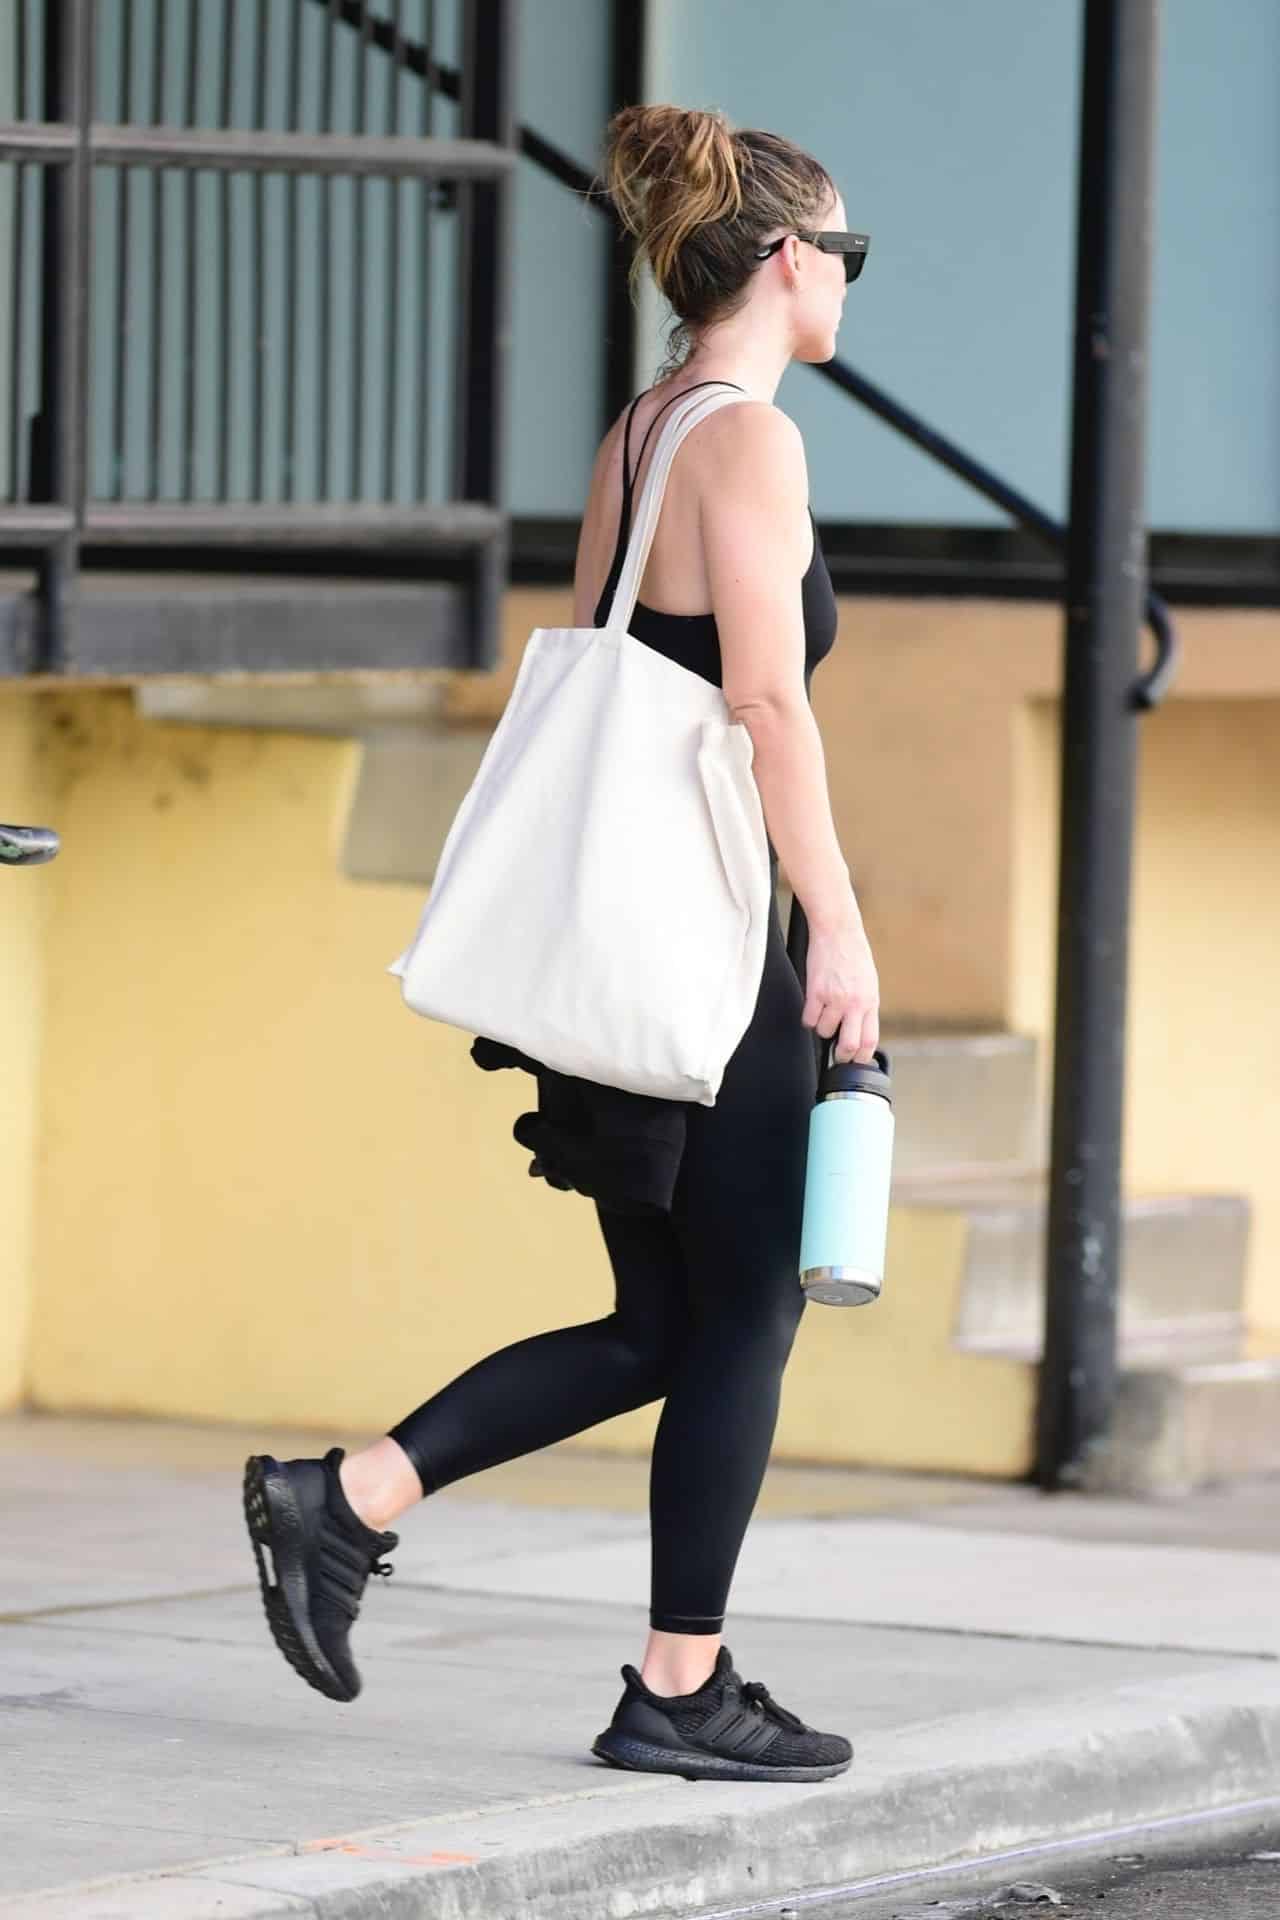 Olivia Wilde Spotted Leaving California Gym in All-Black Workout Ensemble